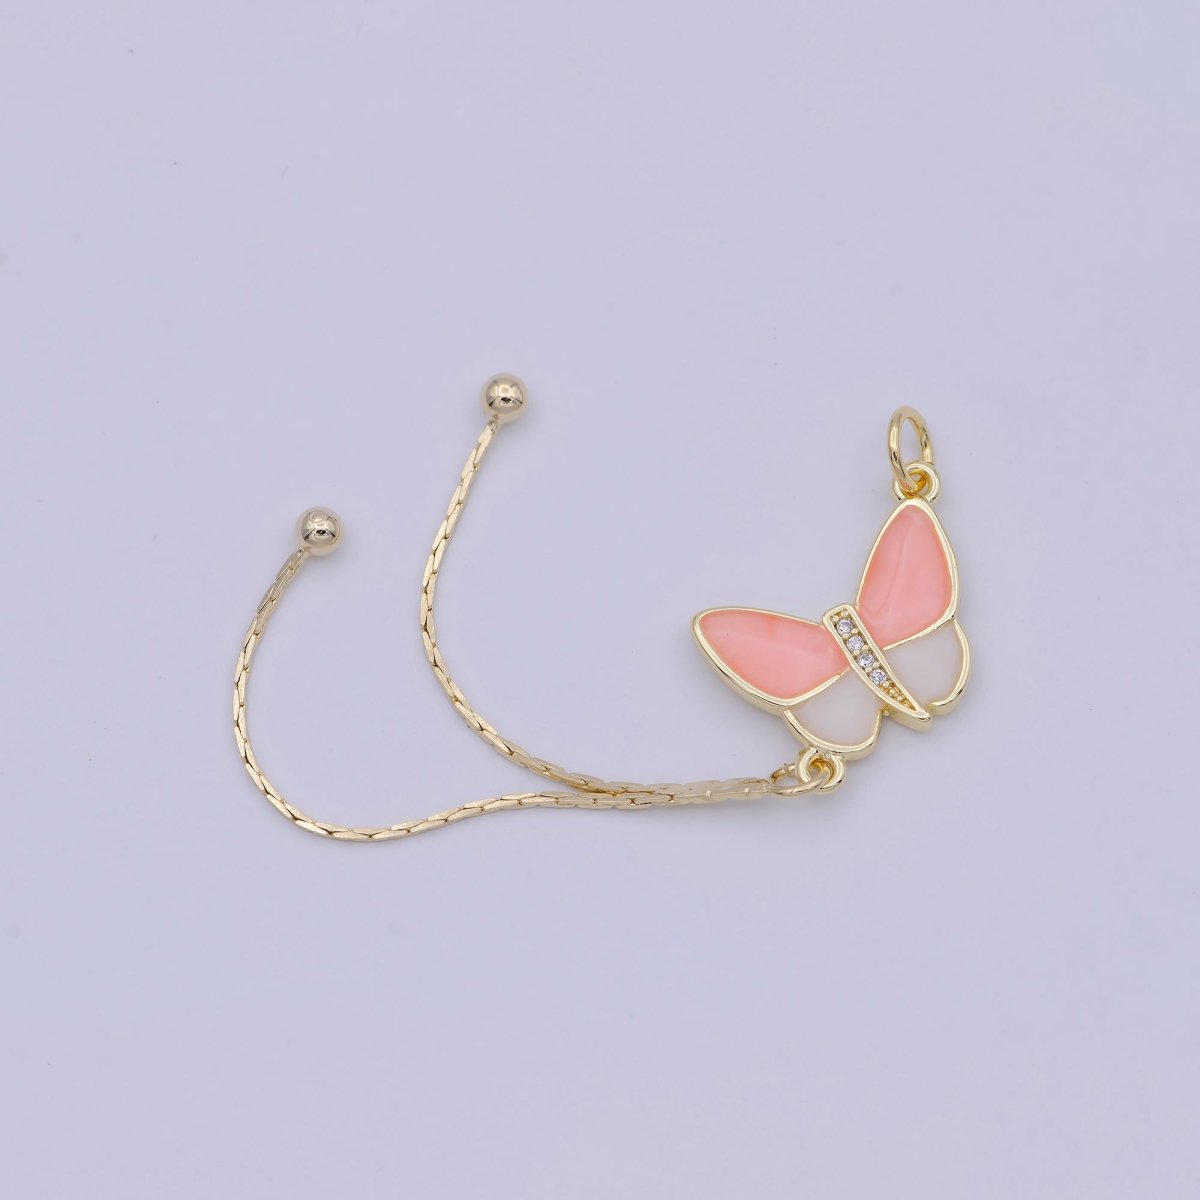 Tiny Pink butterfly charm for Necklace Earring Jewelry supplies, Earring makings, Animal charm W-184 - DLUXCA